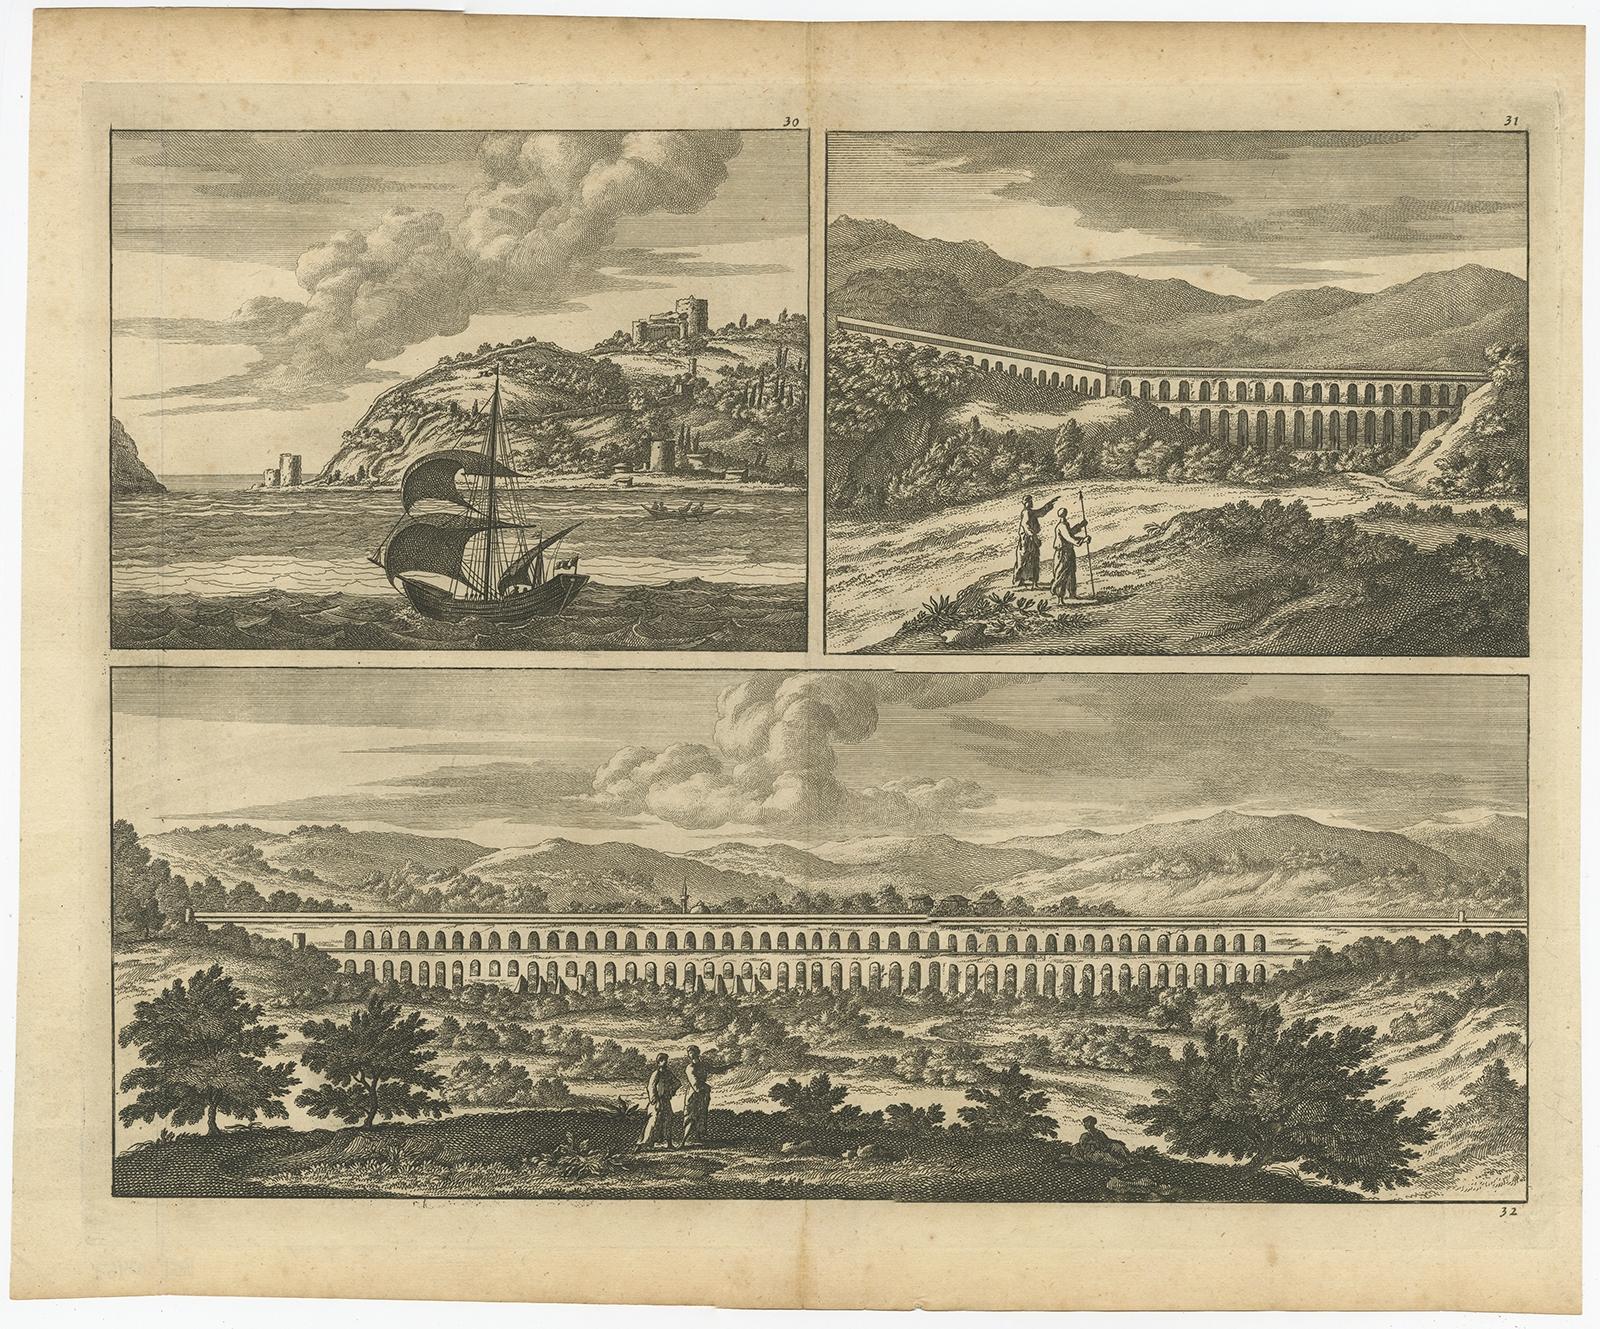 Untitled print with a view of the Bosphorus and the Black Sea. 

Right and below an aqueduct. Source unknown, to be determined. Please study image carefully.

Artists and Engravers: Anonymous.